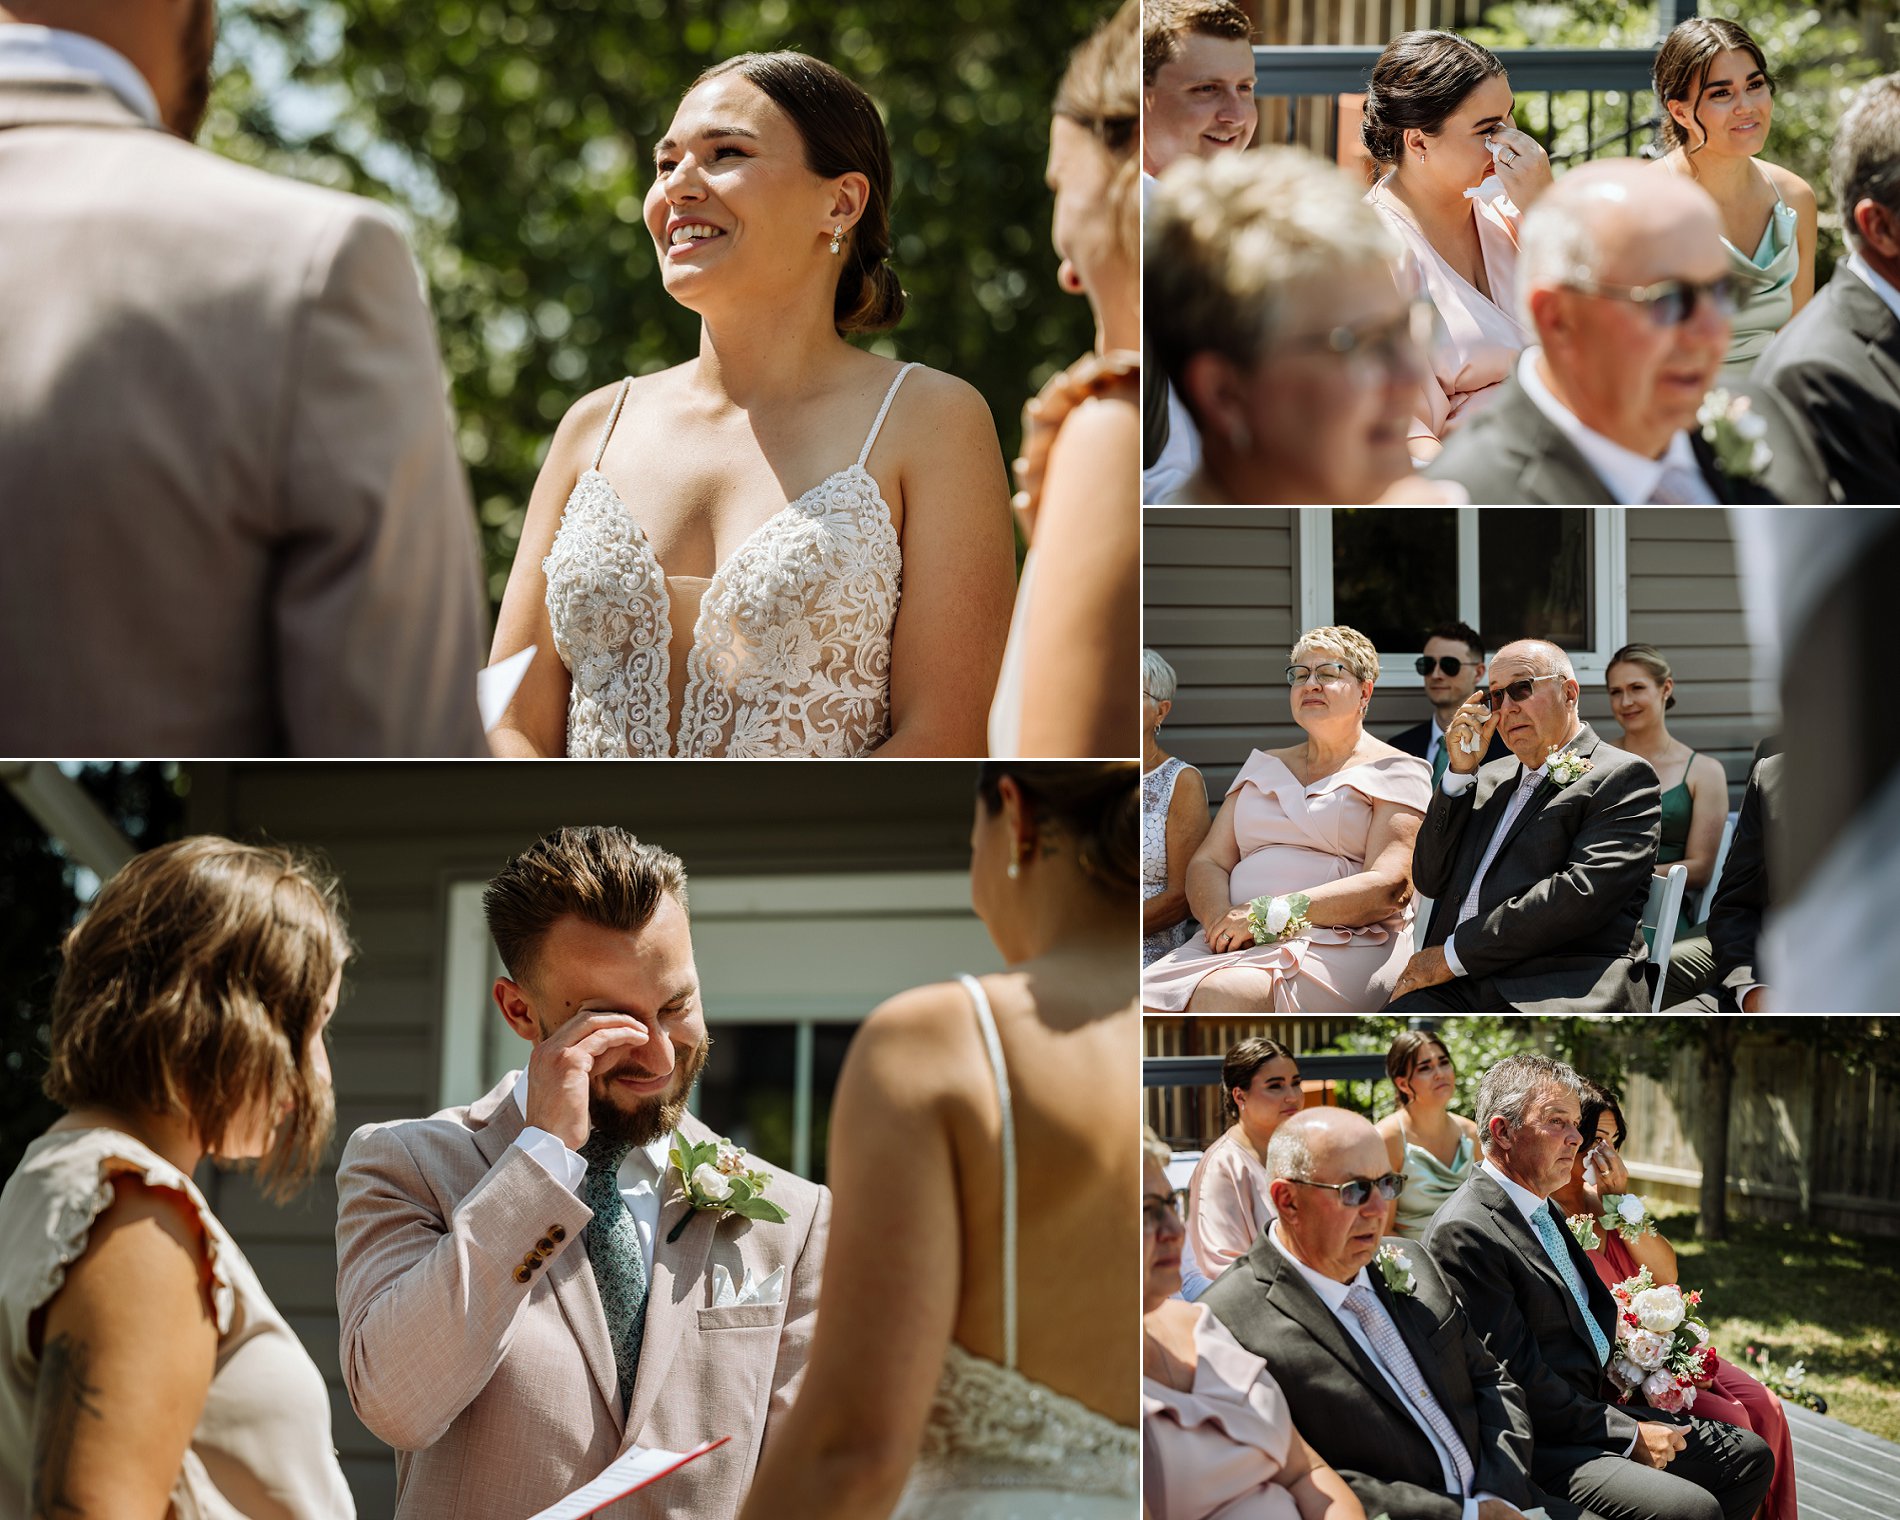 An emotional backyard wedding ceremony in Saskatoon as the bride and groom say their vows.